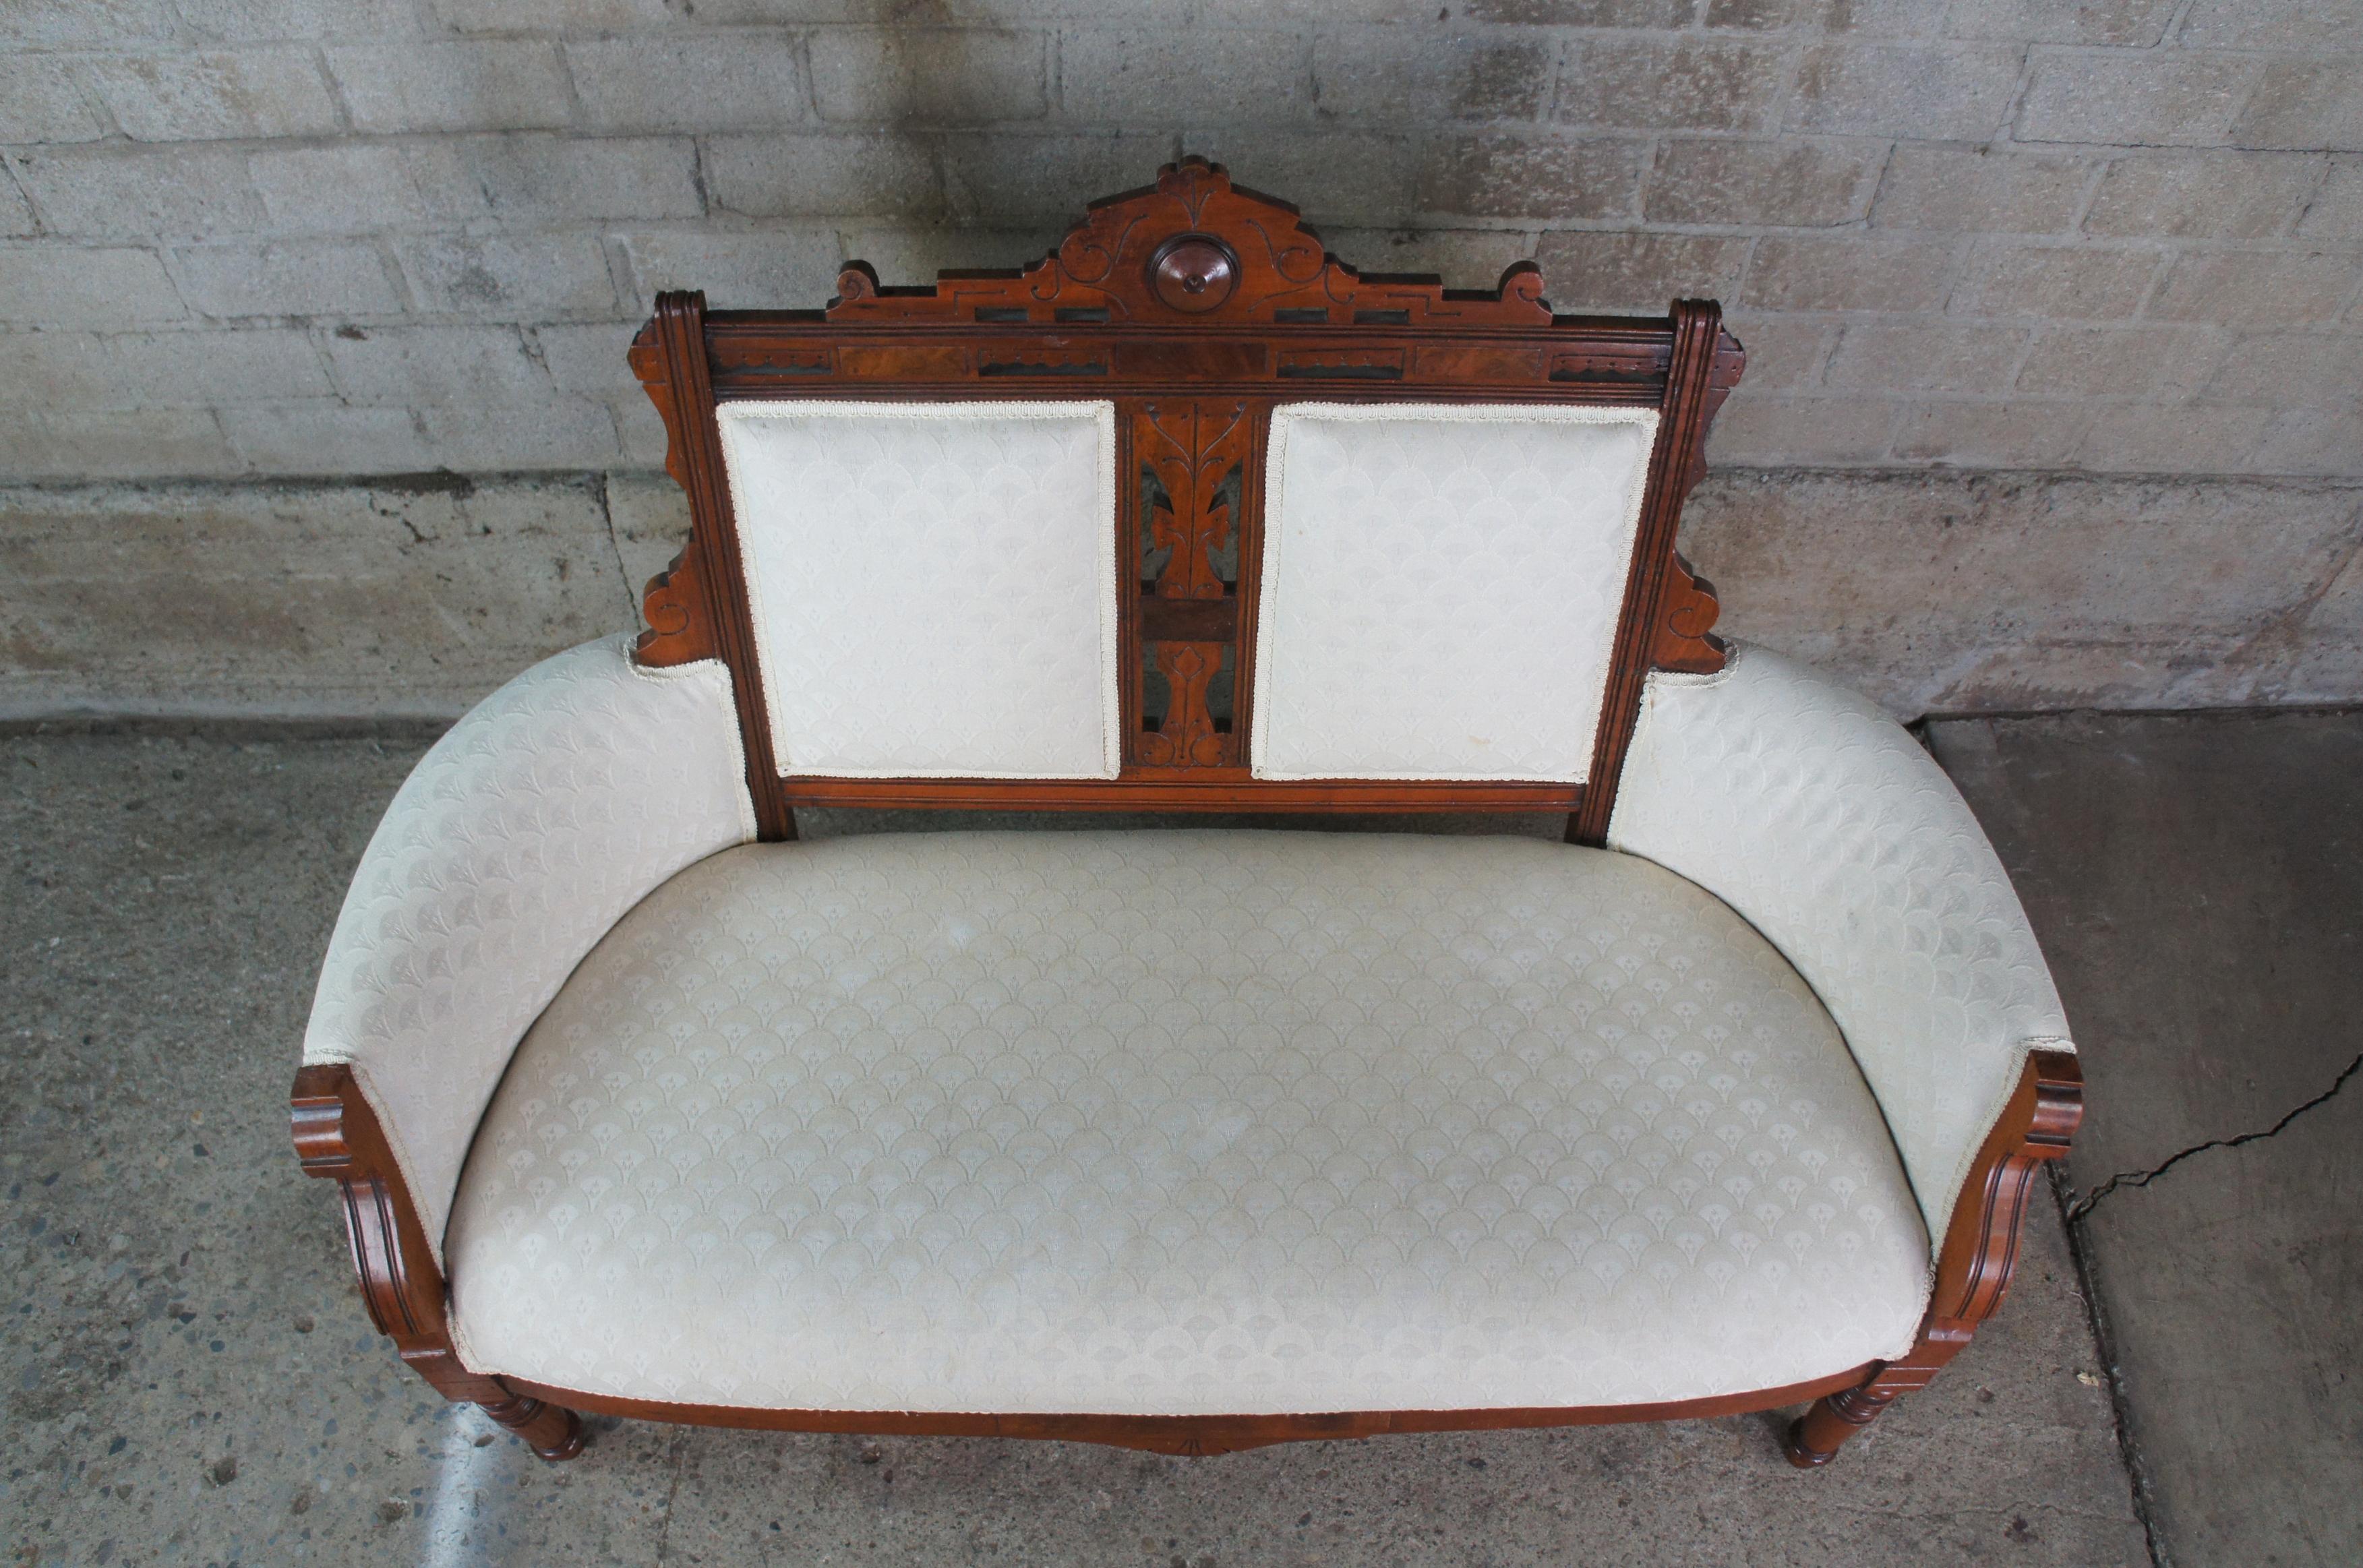 Upholstery Antique Victorian Eastlake Carved Walnut Parlor Settee Love Seat Bench